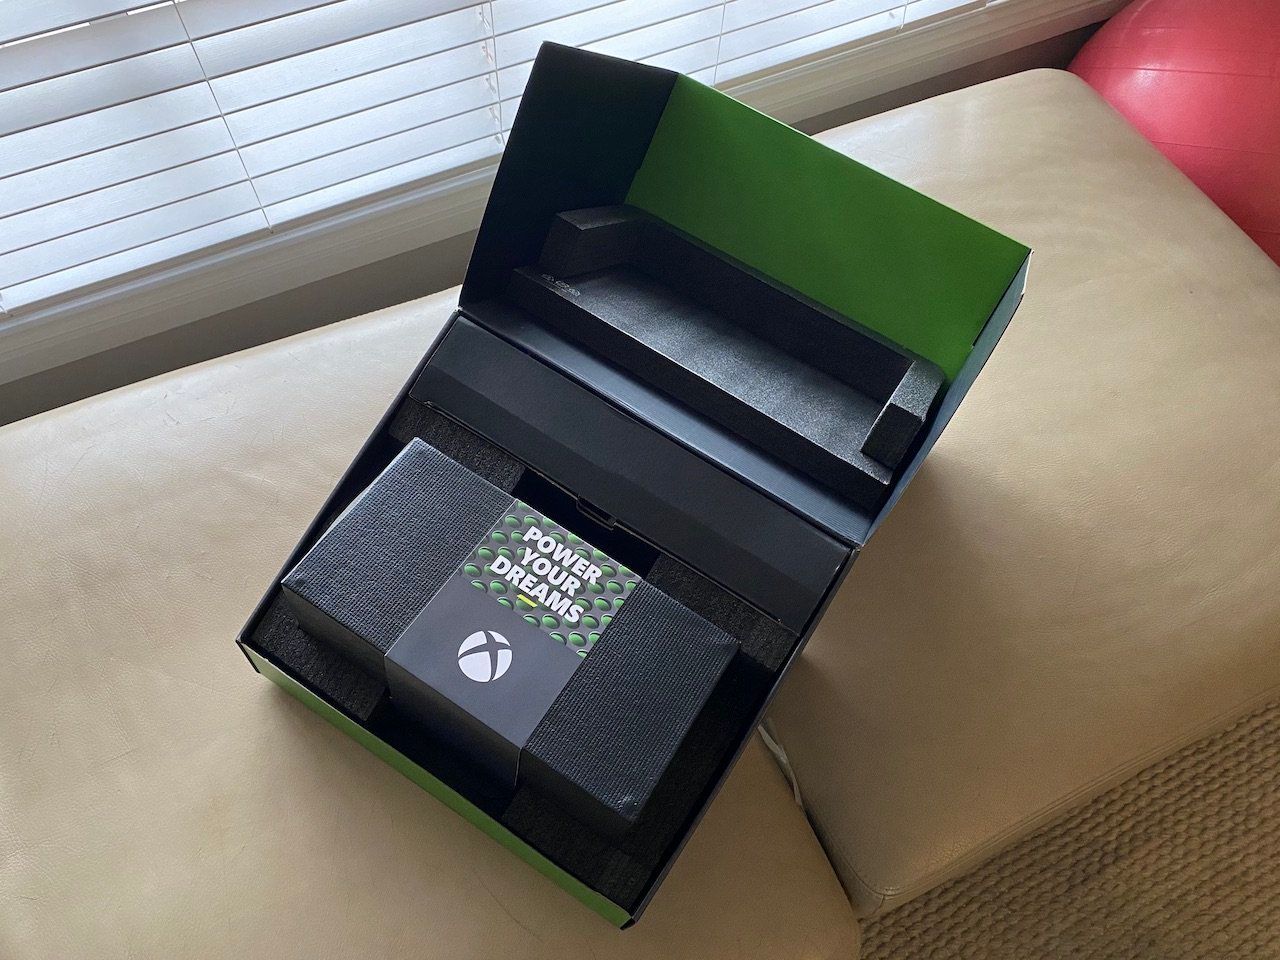 XBOX SERIES X - UNBOXING (POWER YOUR DREAMS) 